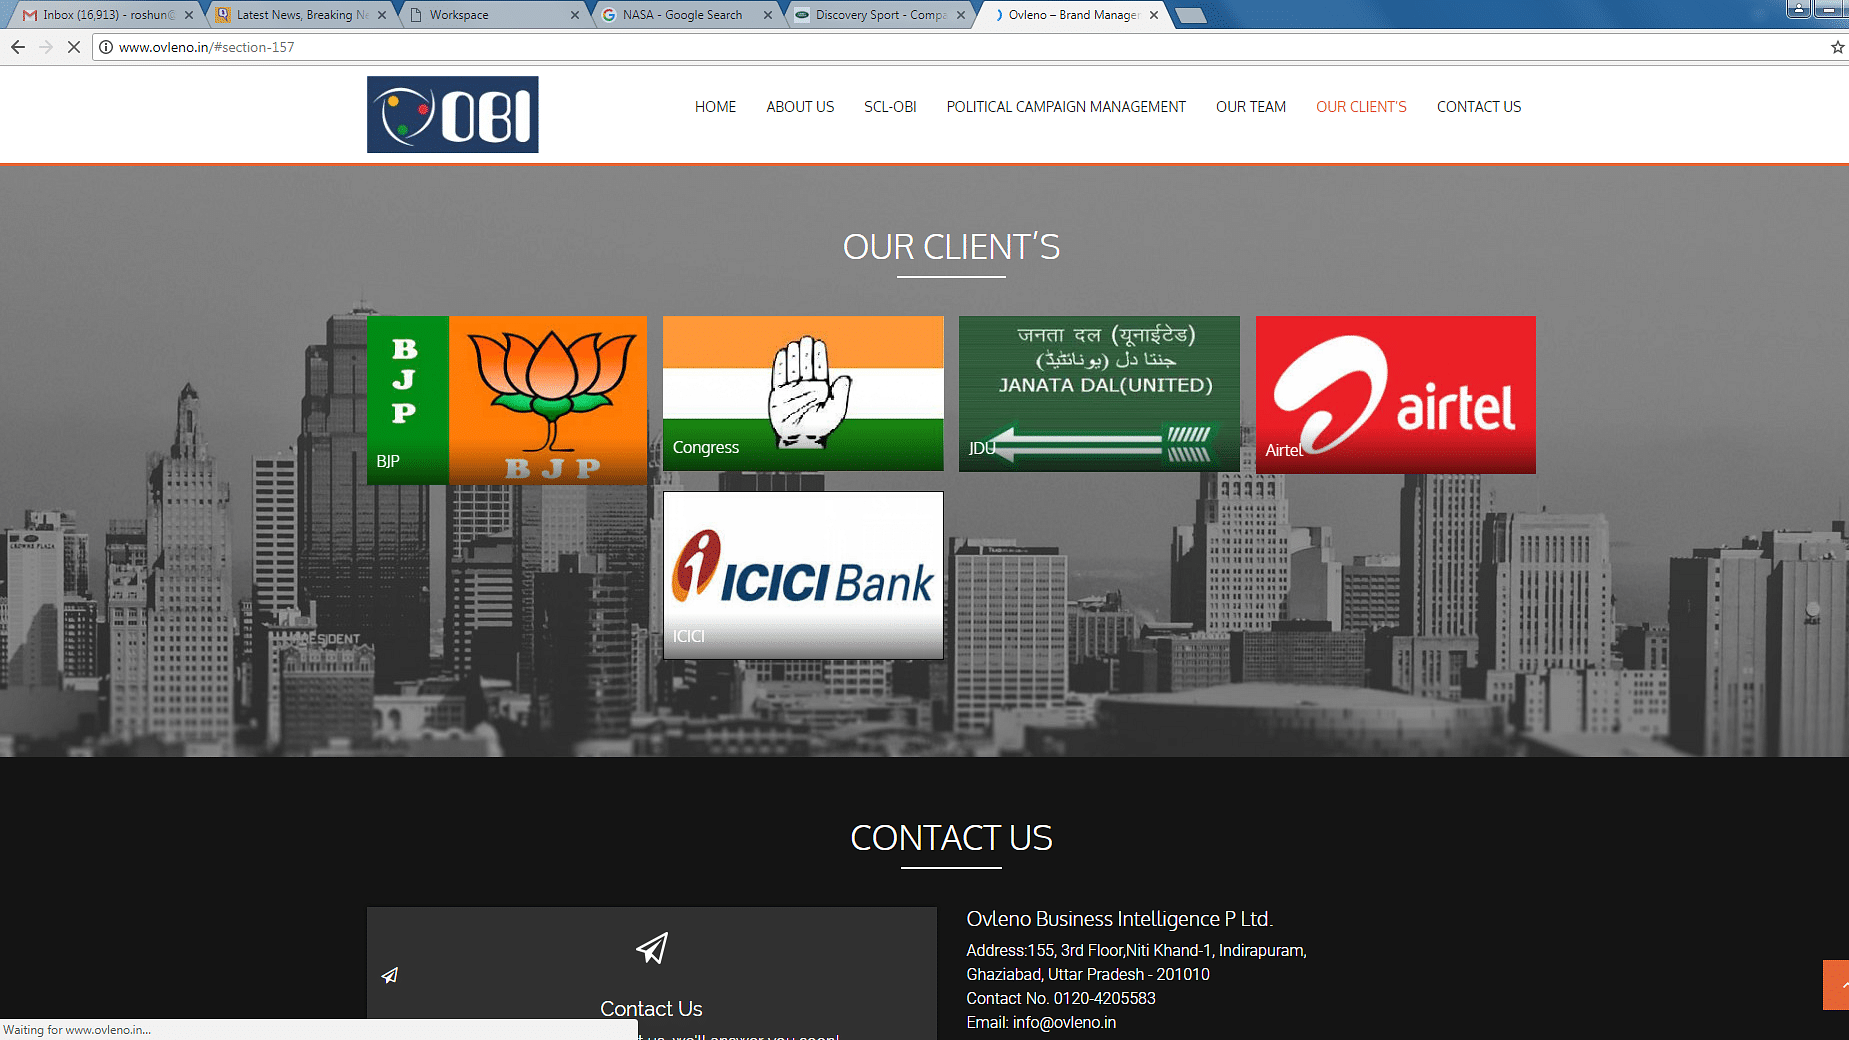 Ovleno - Brand Management website’s client page before it was taken down.